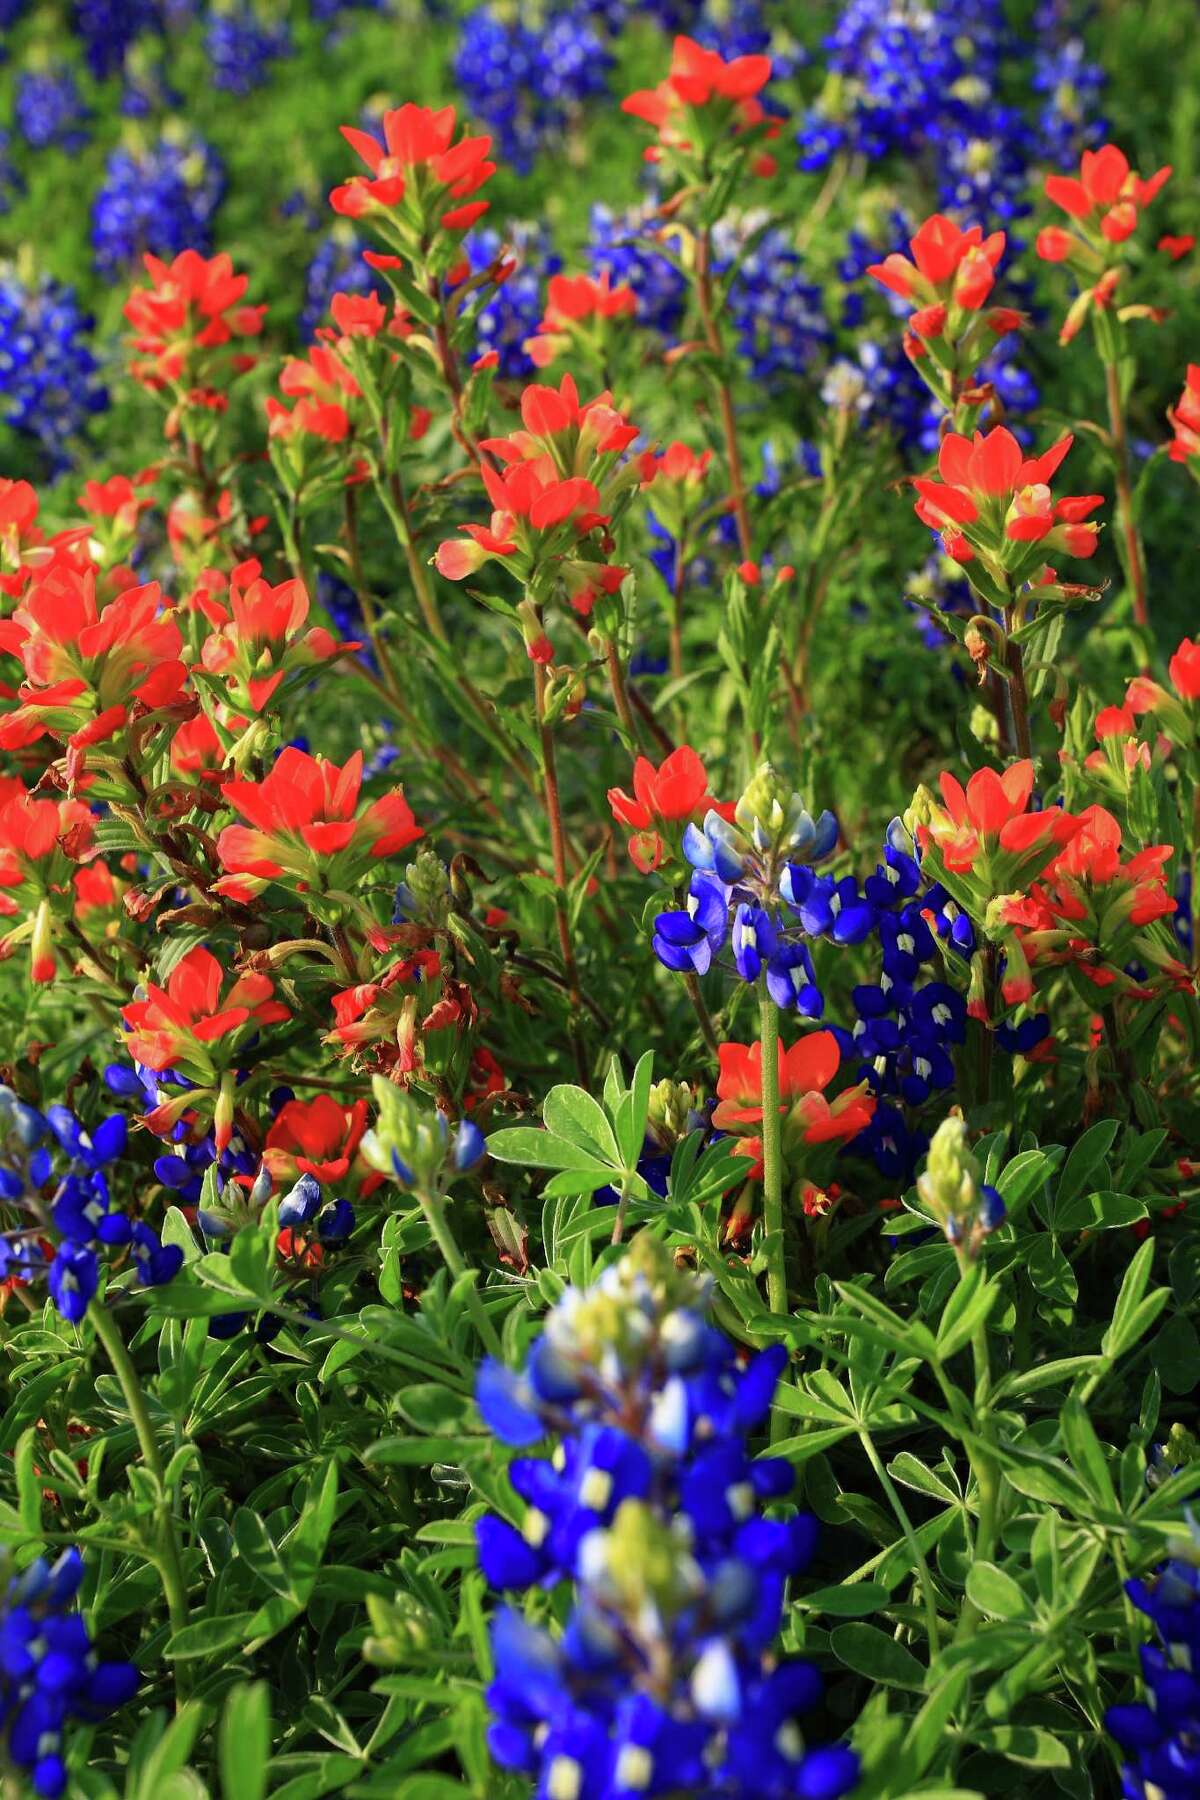 2. There are six different species of bluebonnets  And, they're all a little hard to pronounce if you're not wild about wildflowers: Lupinus subcarnosus, Lupinus texensis, Lupinus havardii, Lupinus concinnus, Lupinus plattensis and Lupinus perennis. 